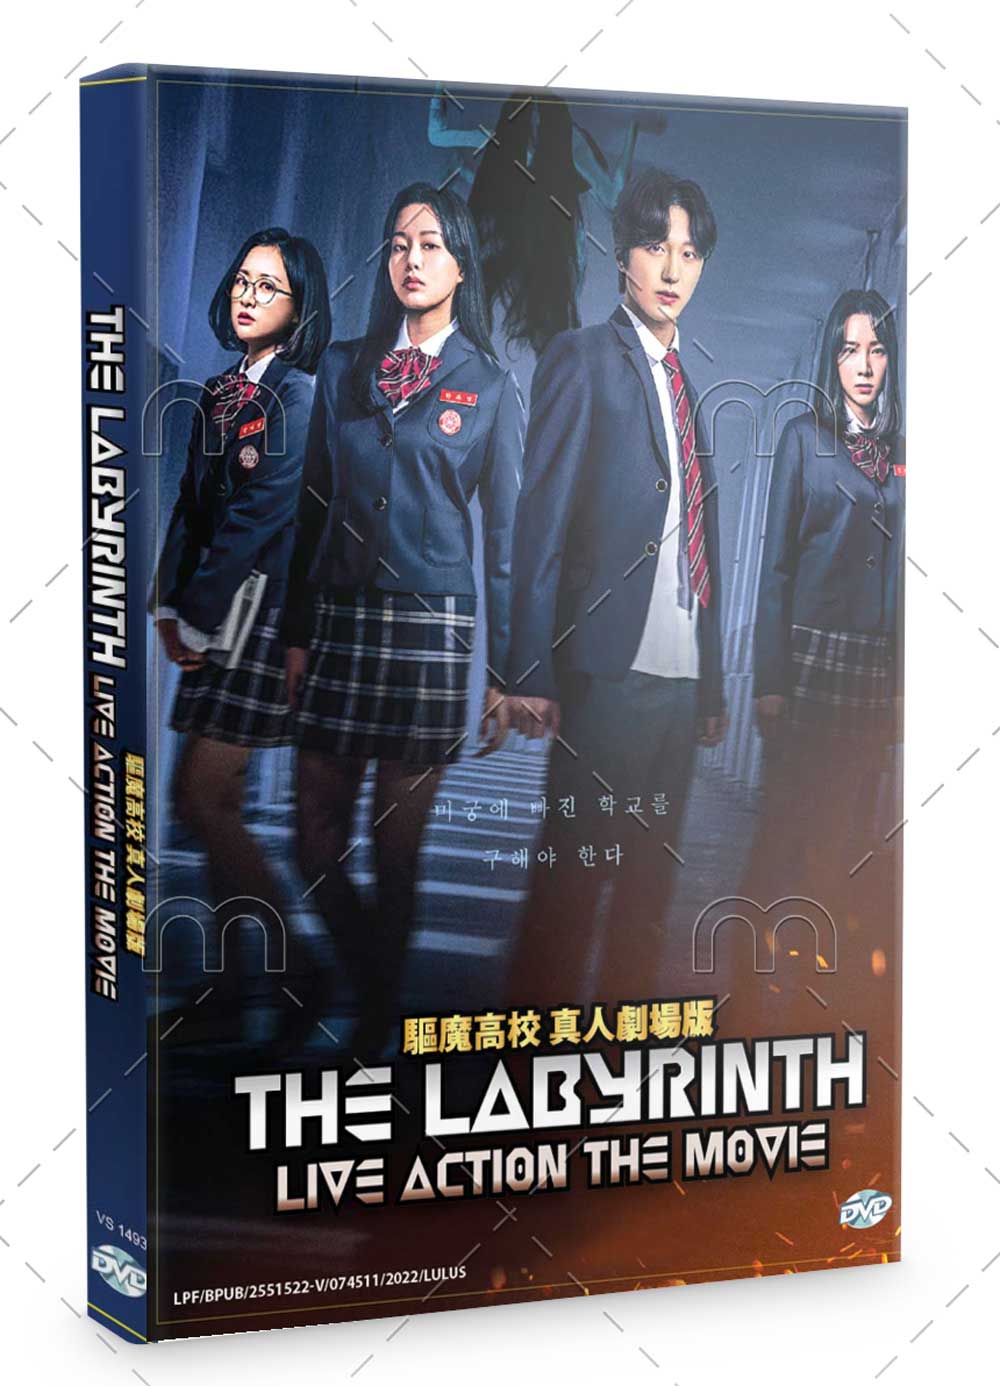 The Labyrinth Live Action The Movie (DVD) (2021) Korean Movie